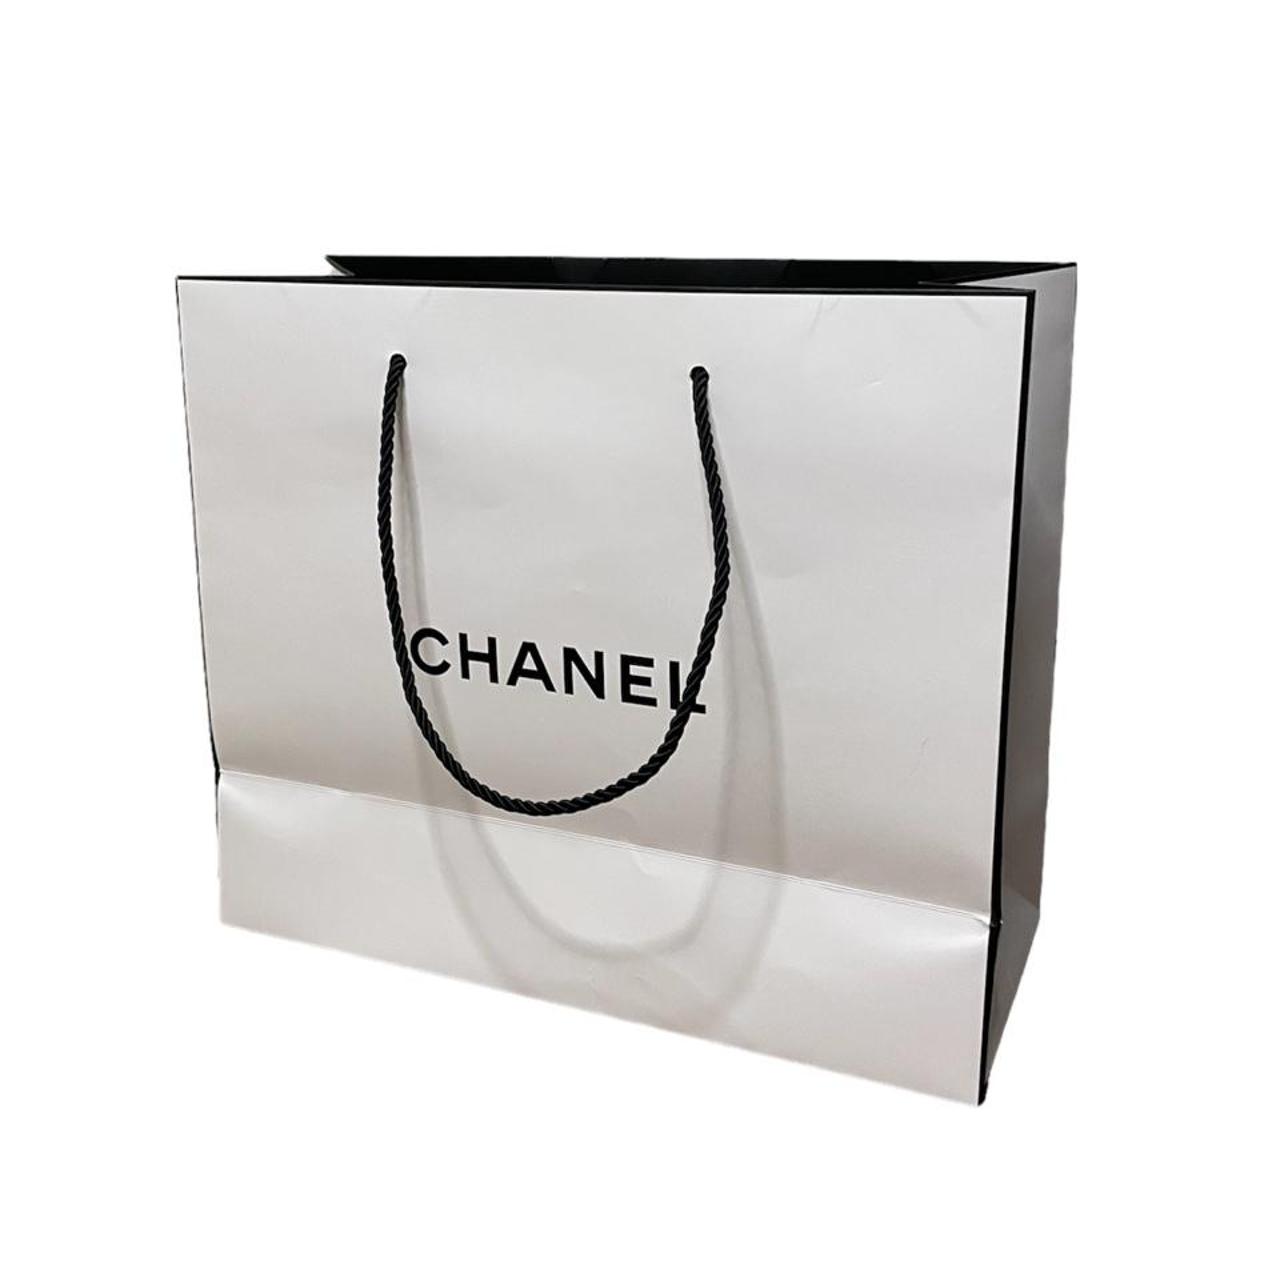 3D Model Collection Chanel Paper Bag Black and White VR / AR / low-poly